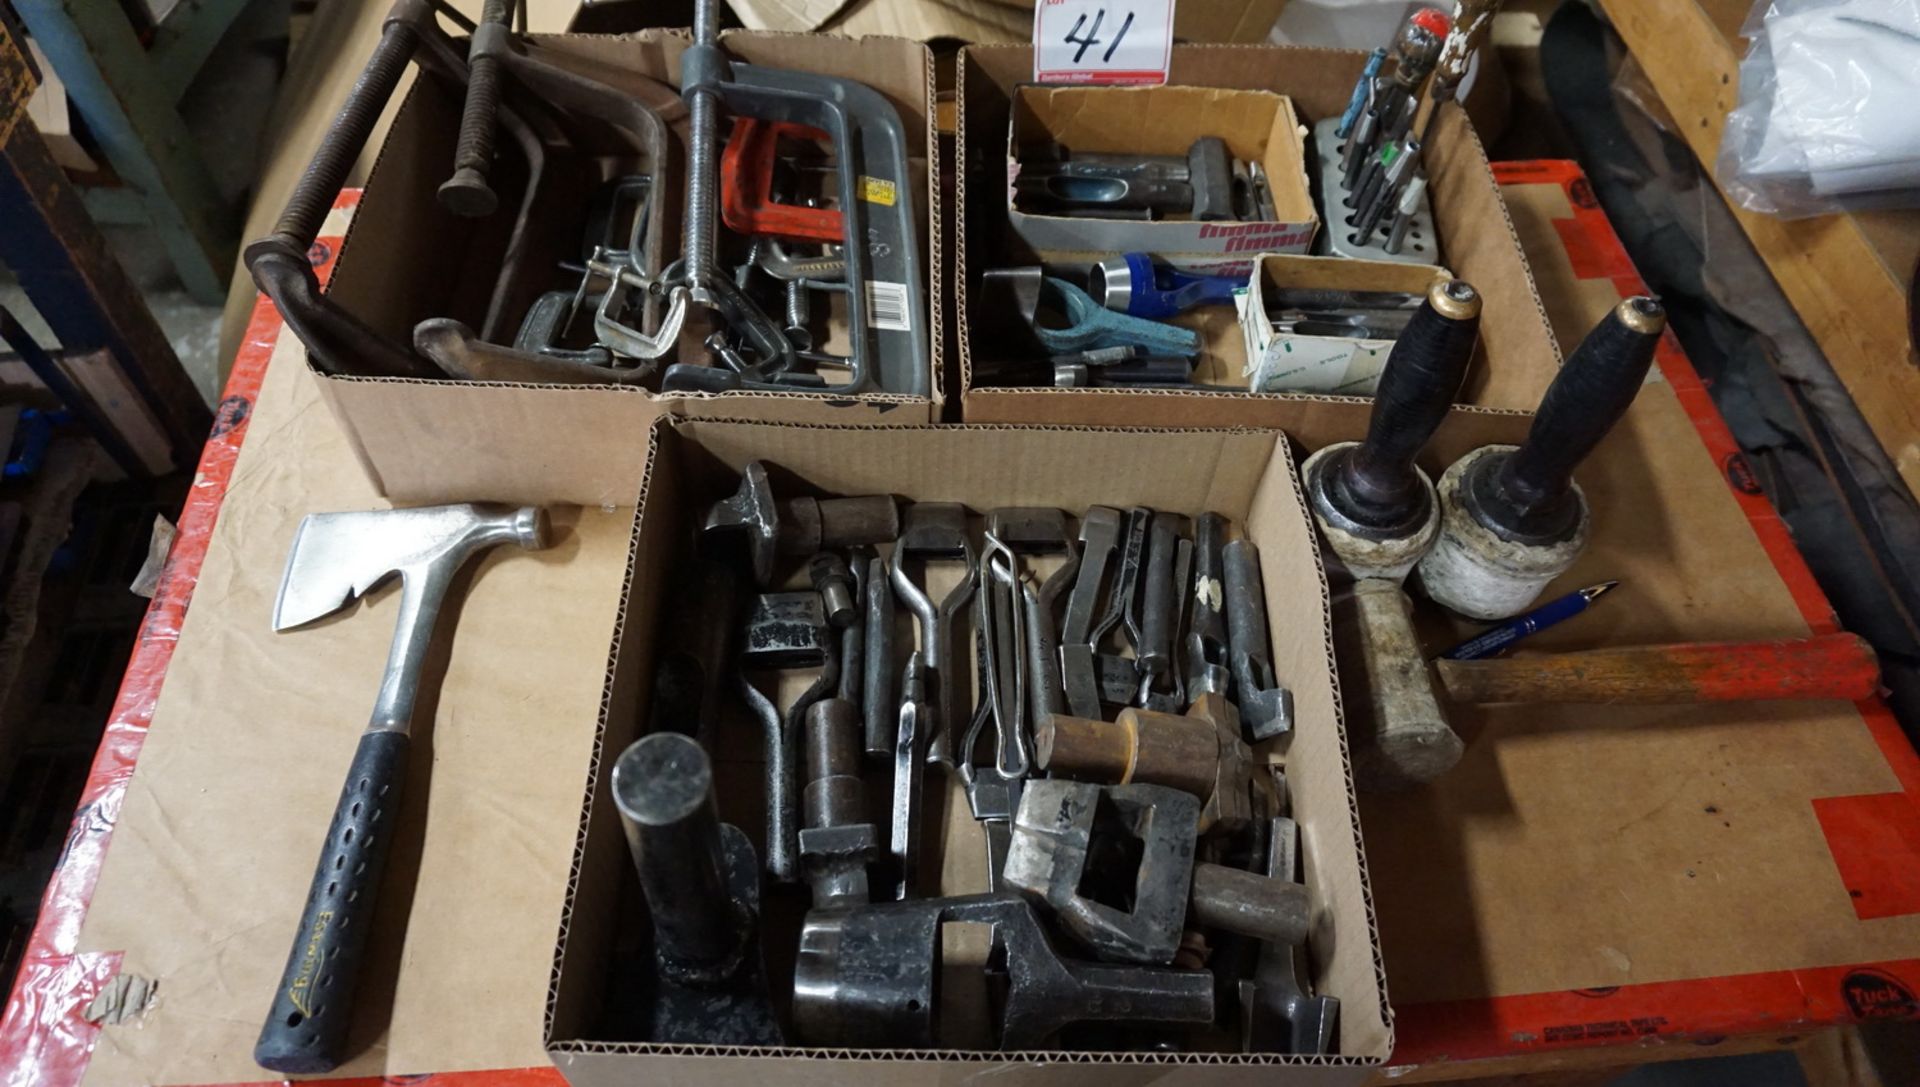 LOT - C-CLAMPS & HOLE PUNCHES